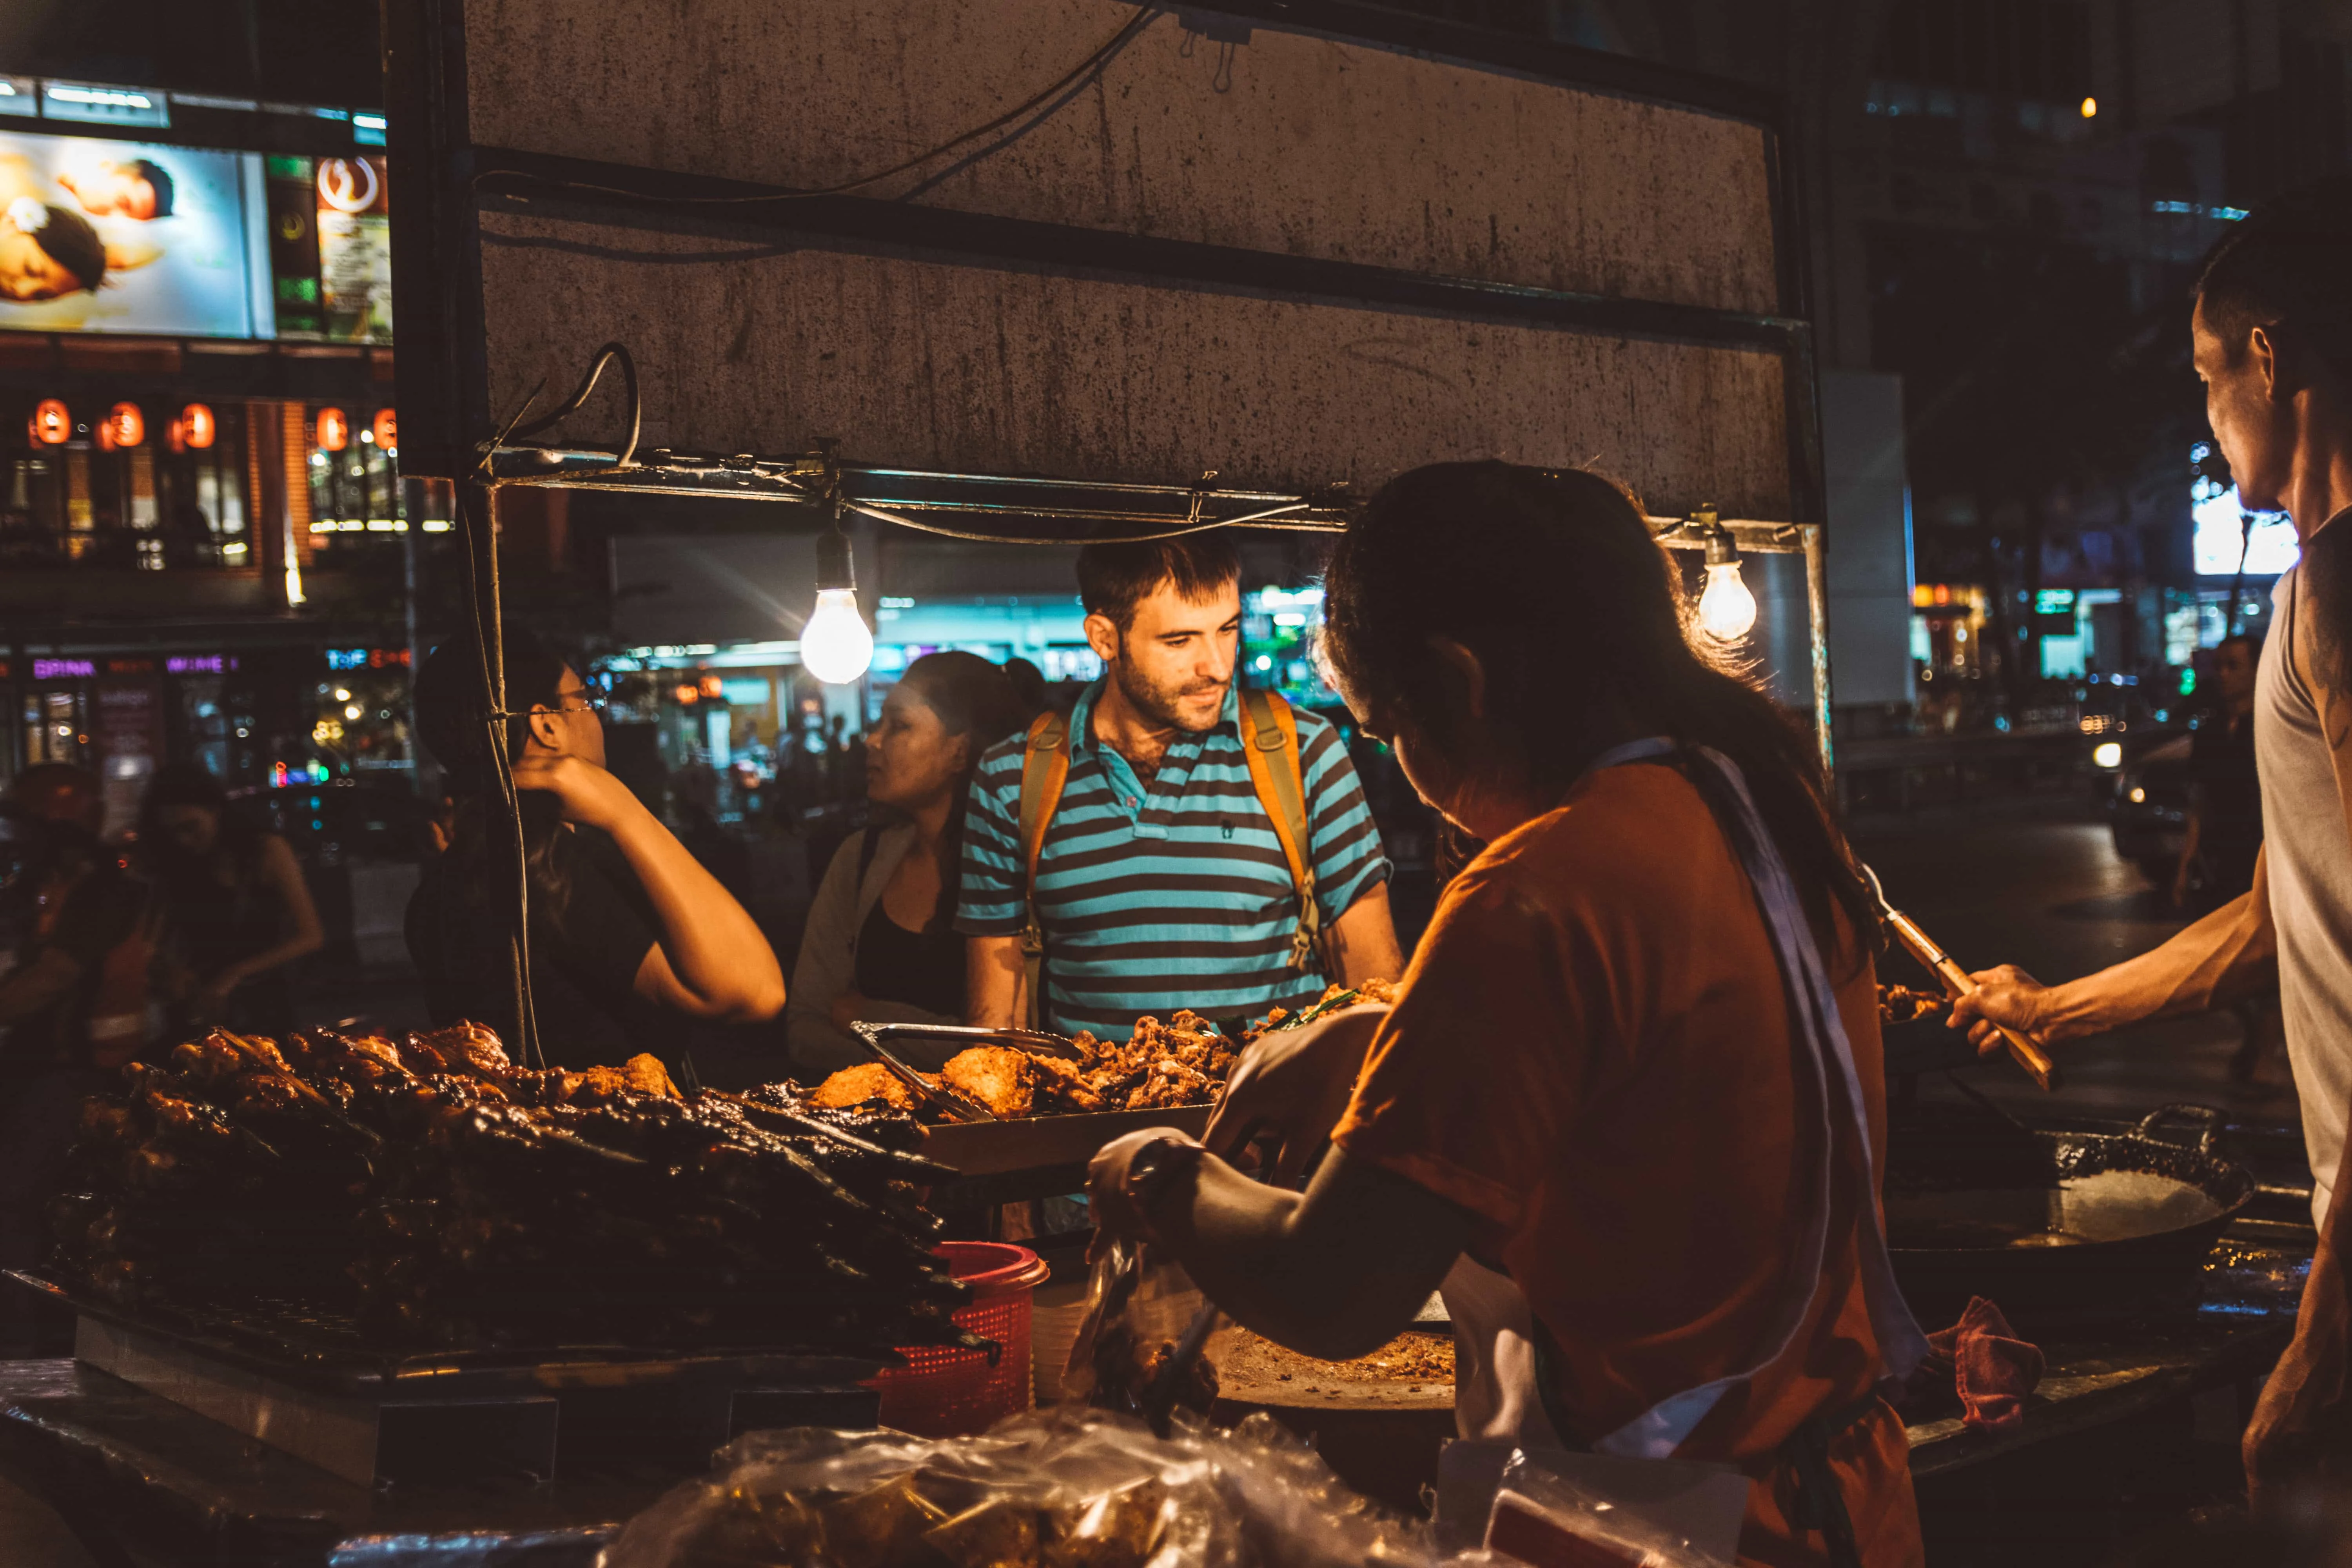 How to get Khao San Road from the airport, How to get Khao San Road, Khao San Road night market, Where to stay in Khao San Road, where to sleep in Khao San Road, what to do in Khao San Road, What to eat in Khao San Road, Unicorn Cafe